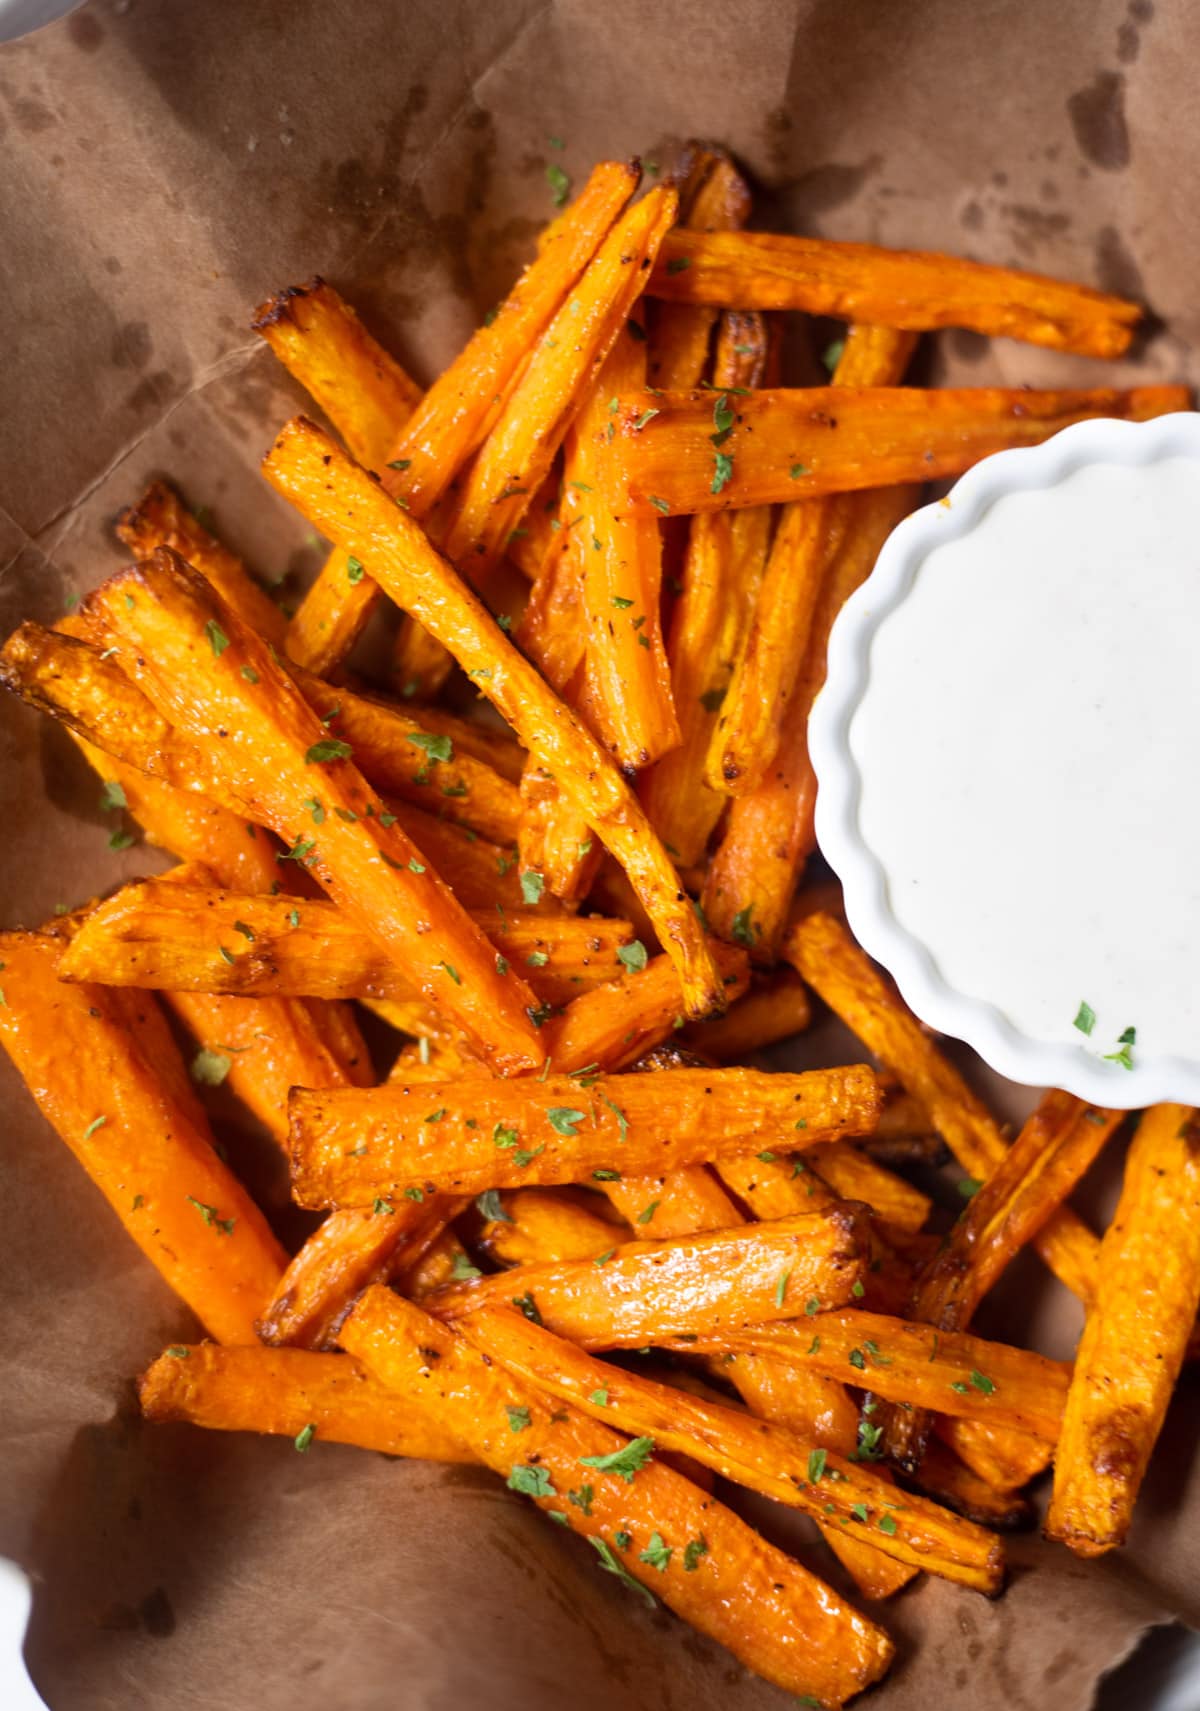 Roasted carrots on a brown paper with a dip